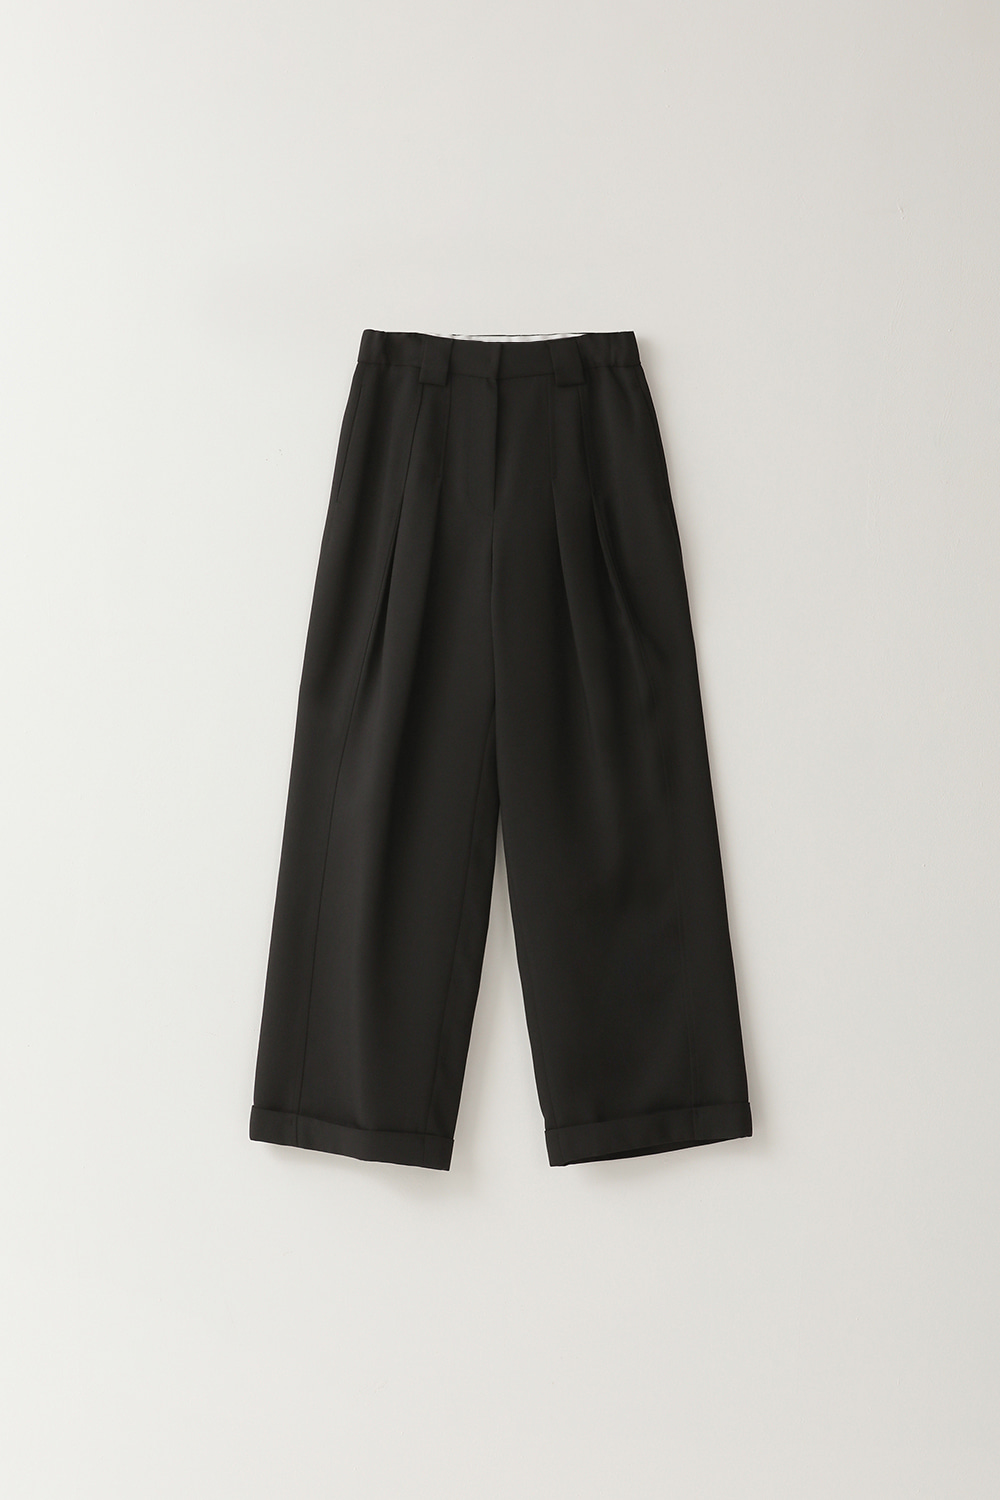 [Black] Two Pintuck Trousers